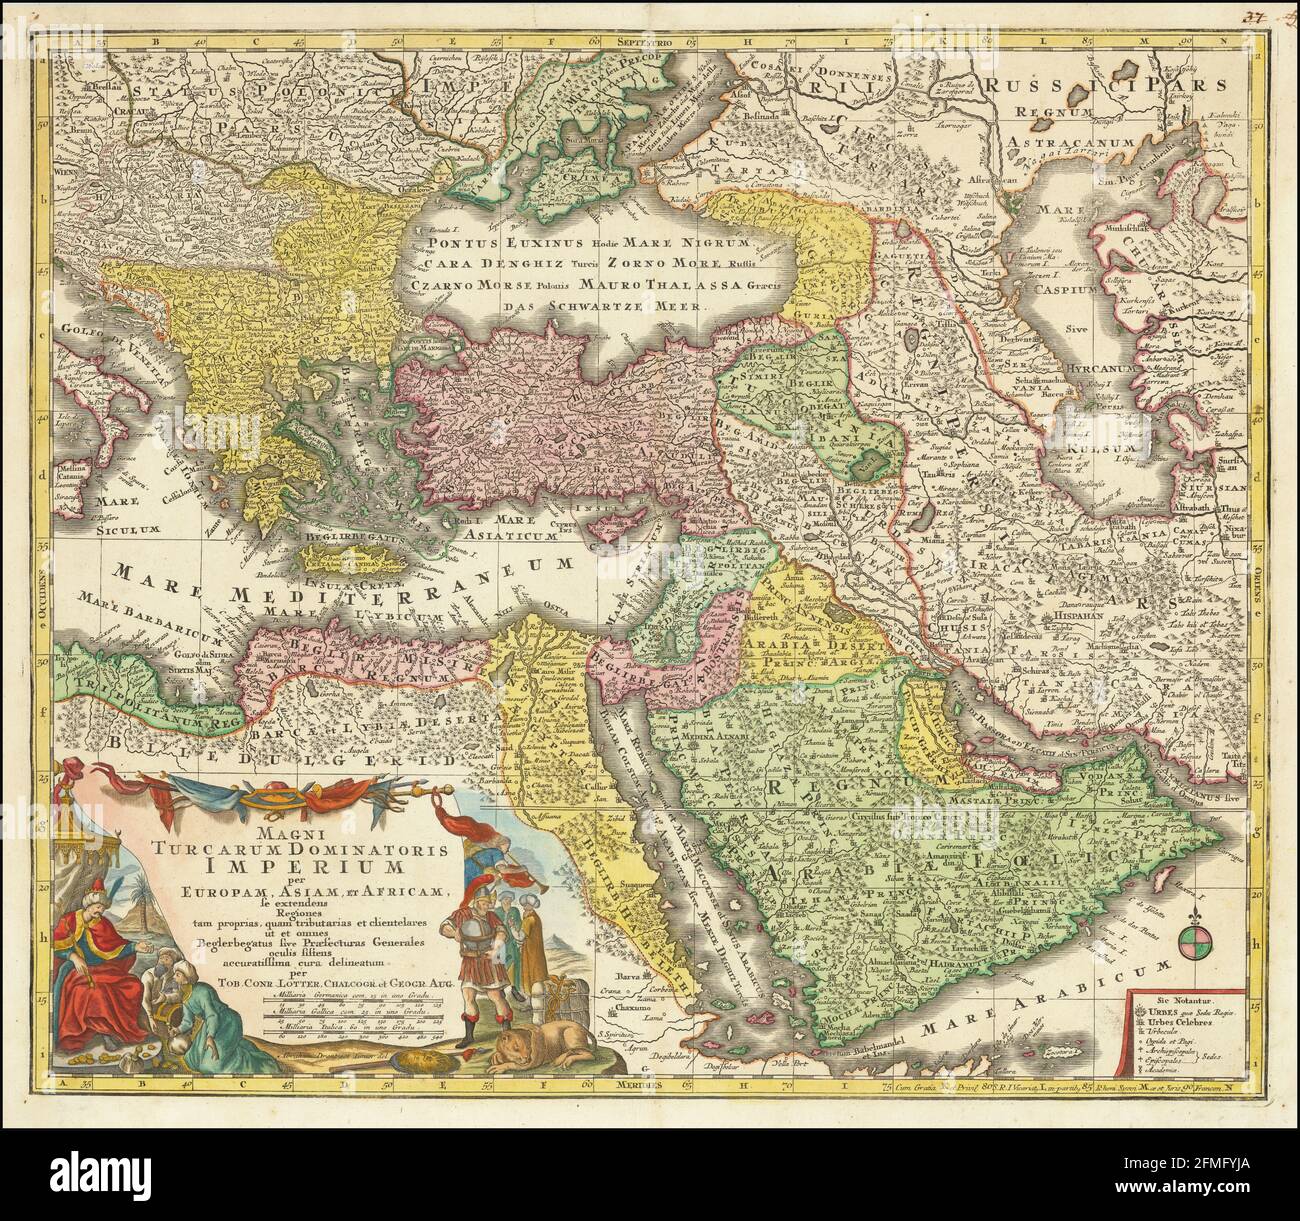 Vintage copper engraved map of Ottoman Empire from 18th century. All maps are beautifully colored and illustrated showing the world at the time. Stock Photo